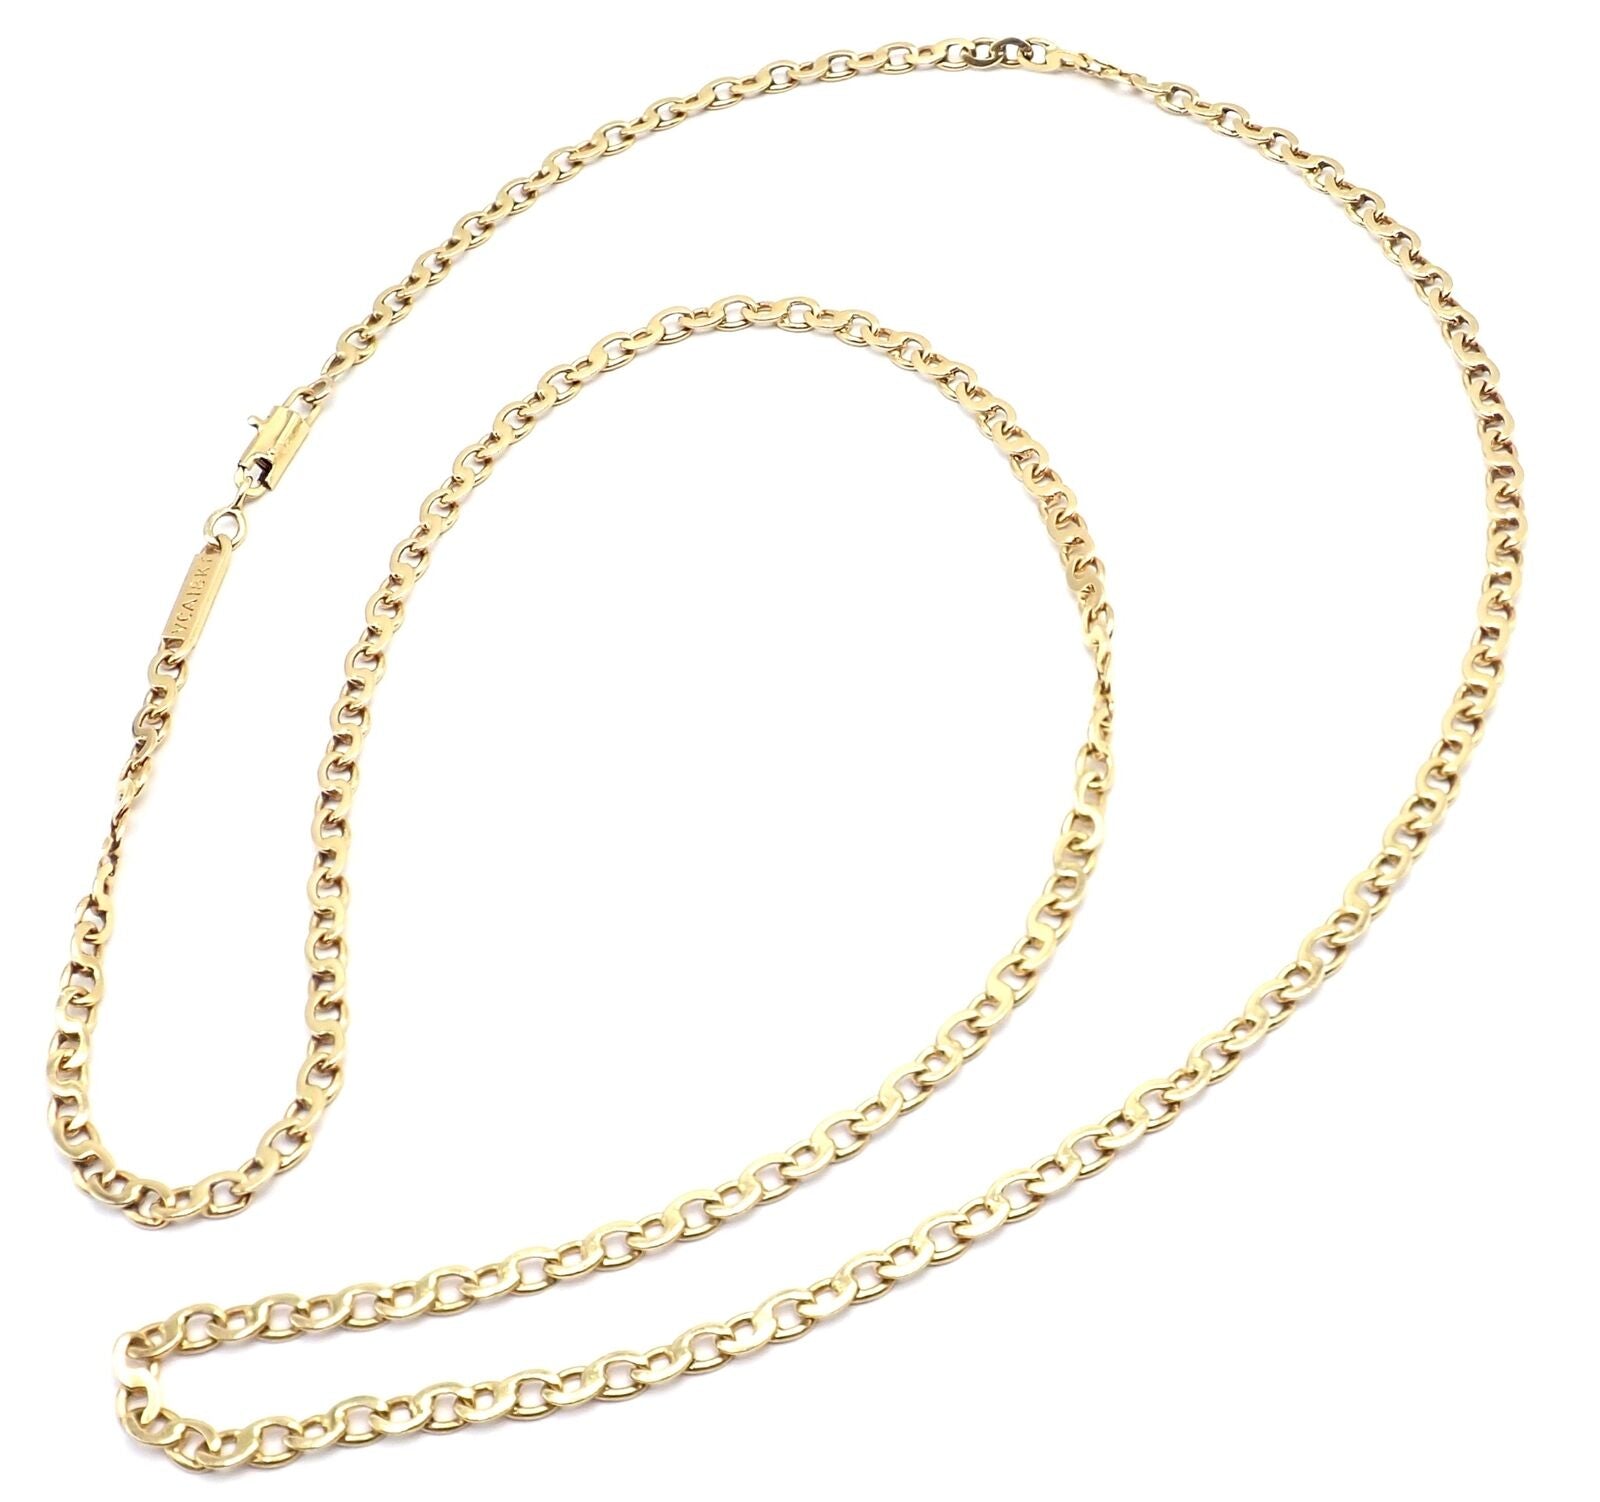 Van Cleef & Arpels Jewelry & Watches:Fine Jewelry:Necklaces & Pendants Authentic! Vintage Van Cleef & Arpels 18k White Gold Long Link Chain Necklace